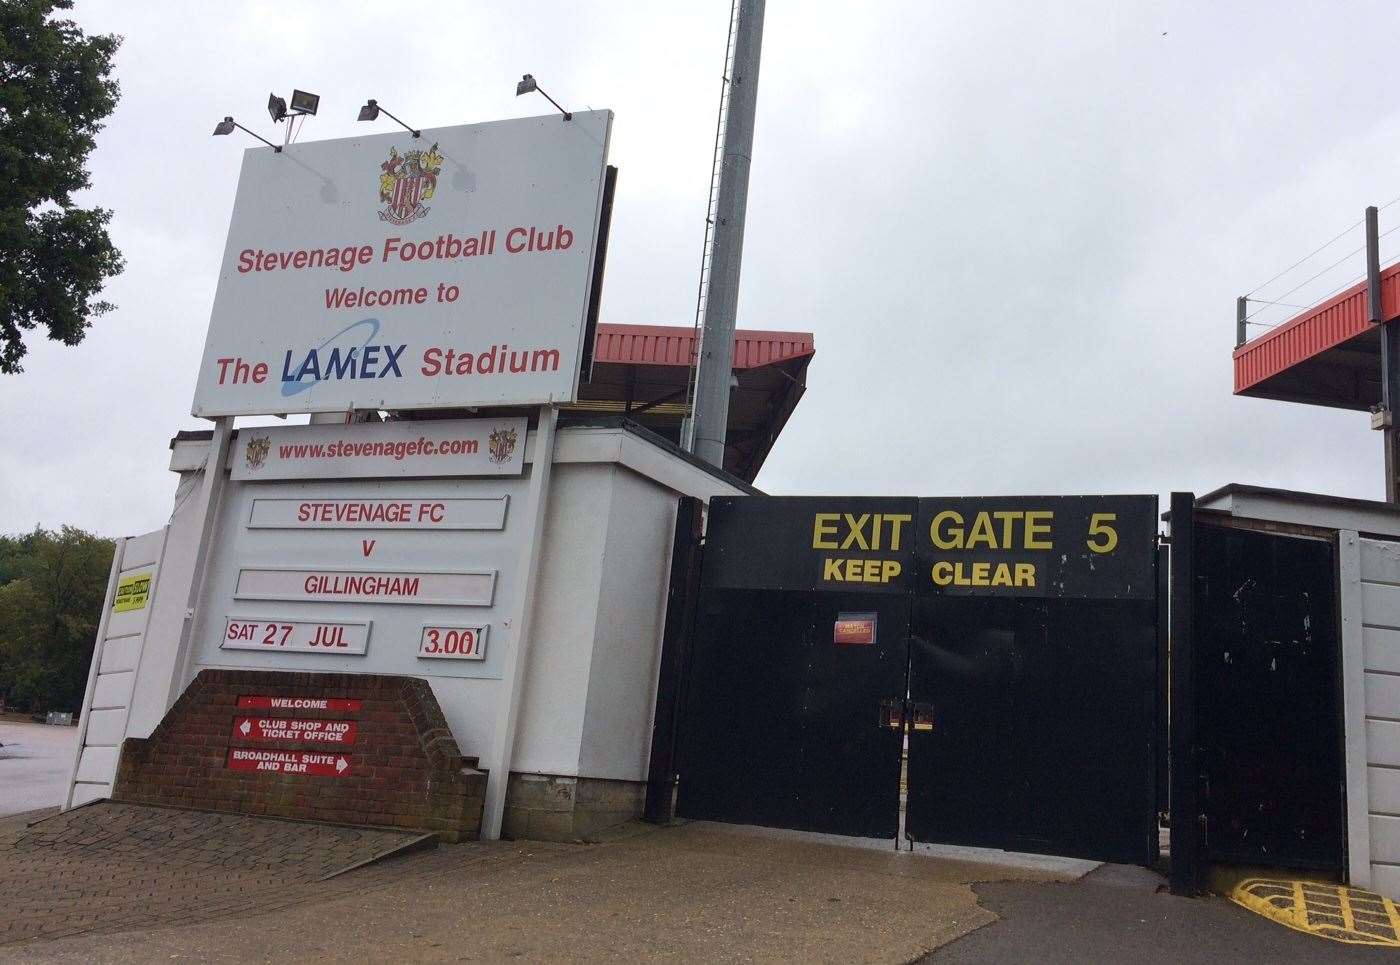 There was no action at Stevenage's Lamex Stadium on Saturday (14370387)